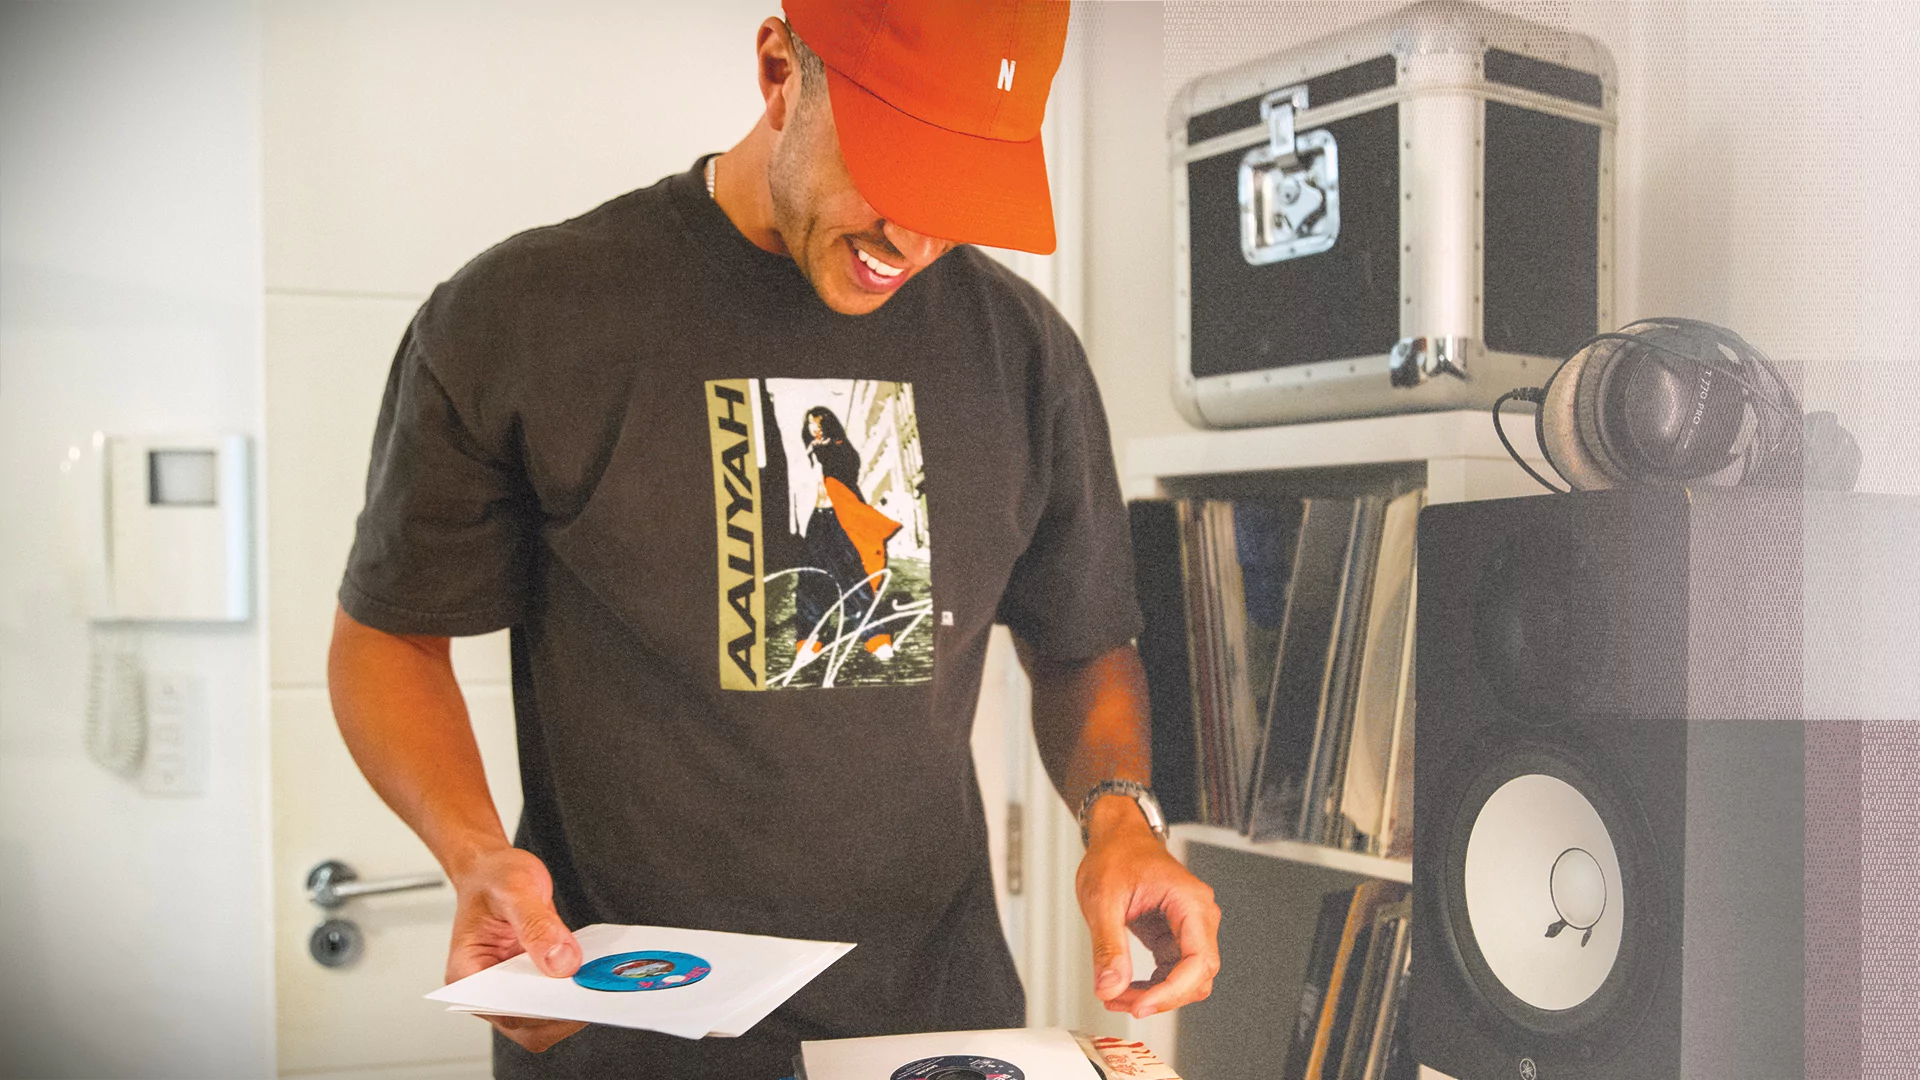 Photo of Melvo Baptiste skimming through records in a studio and wearing a red hat